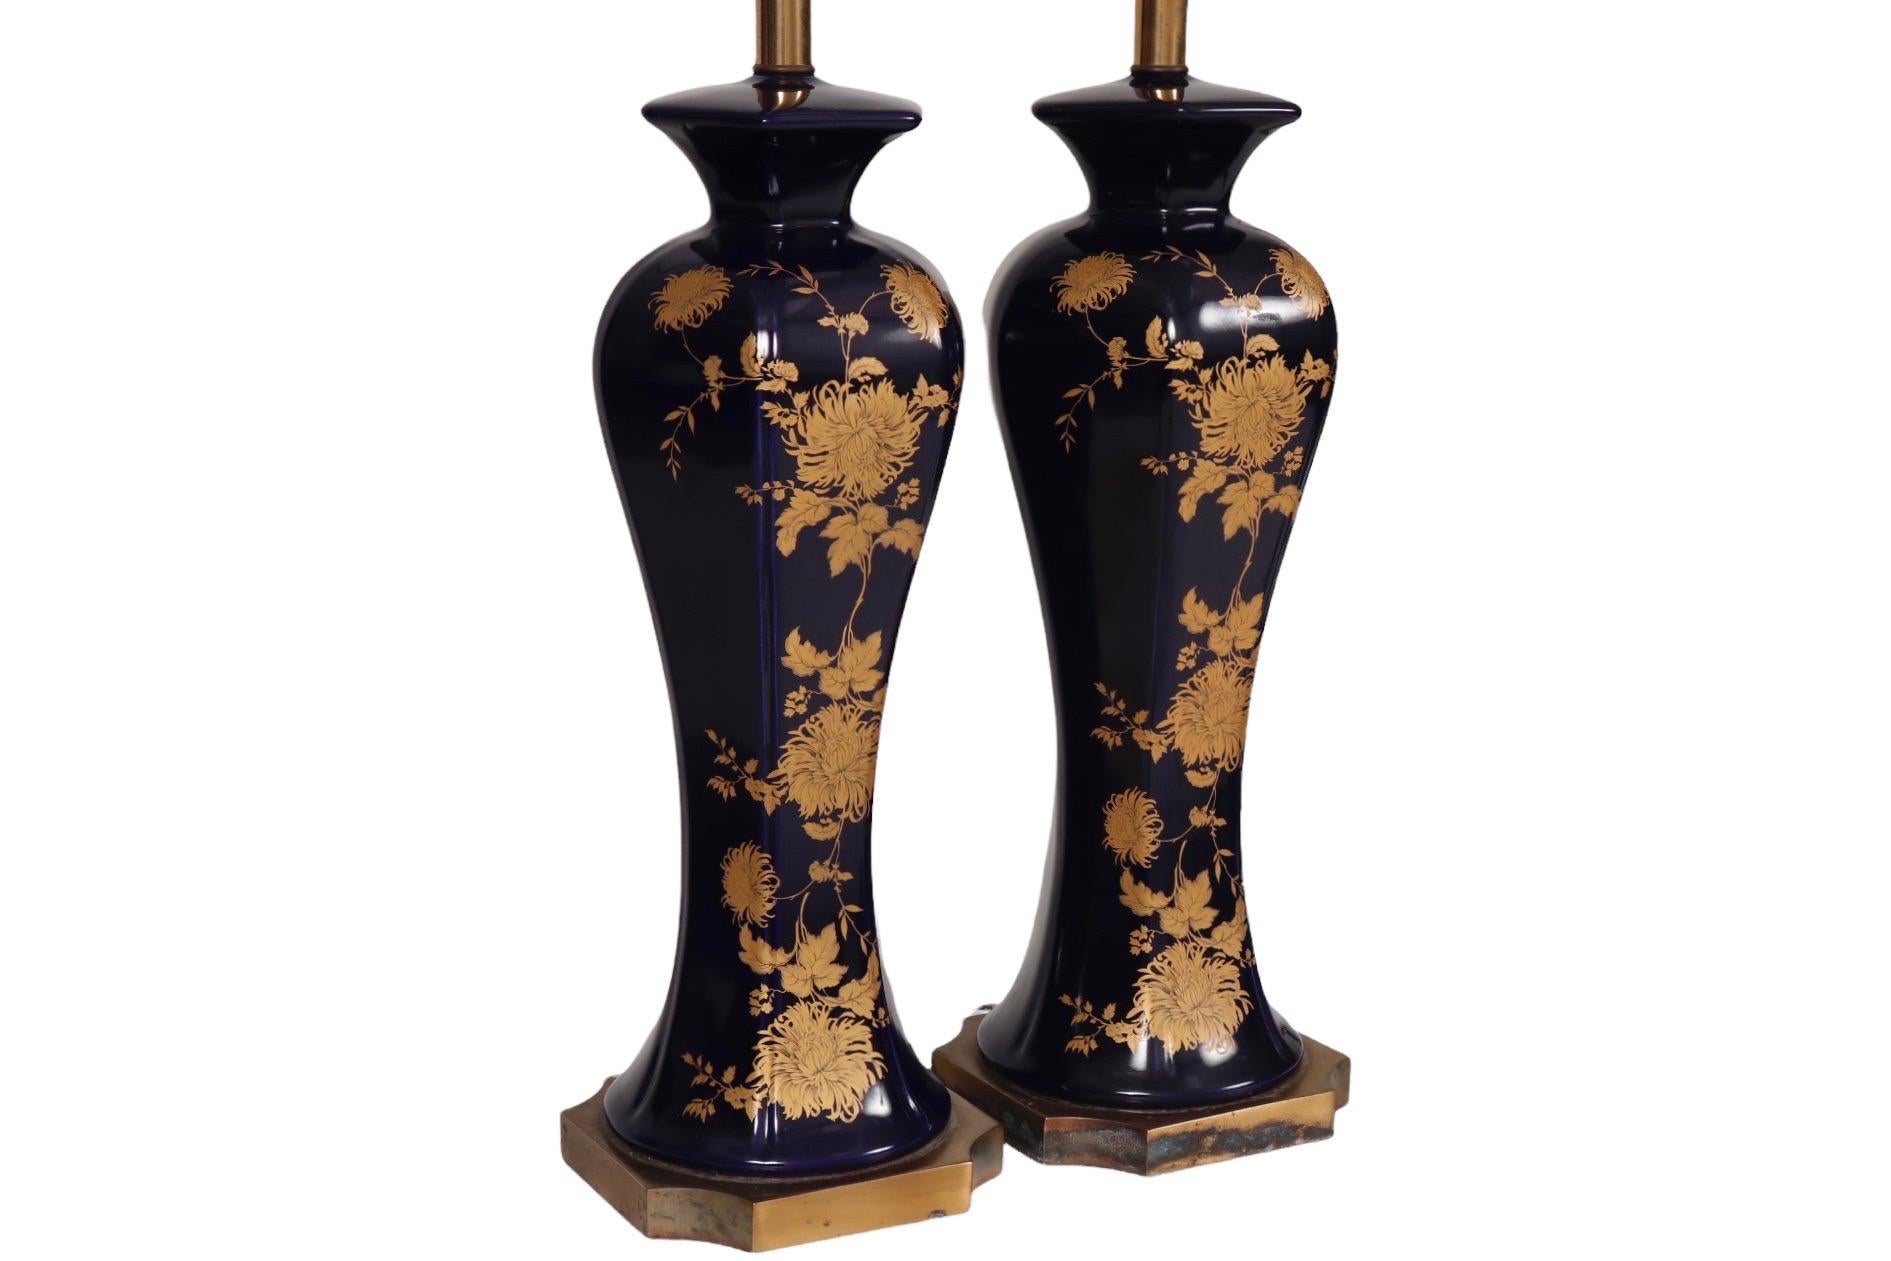 Japanese Style Ceramic Table Lamps, a Pair In Good Condition For Sale In Bradenton, FL